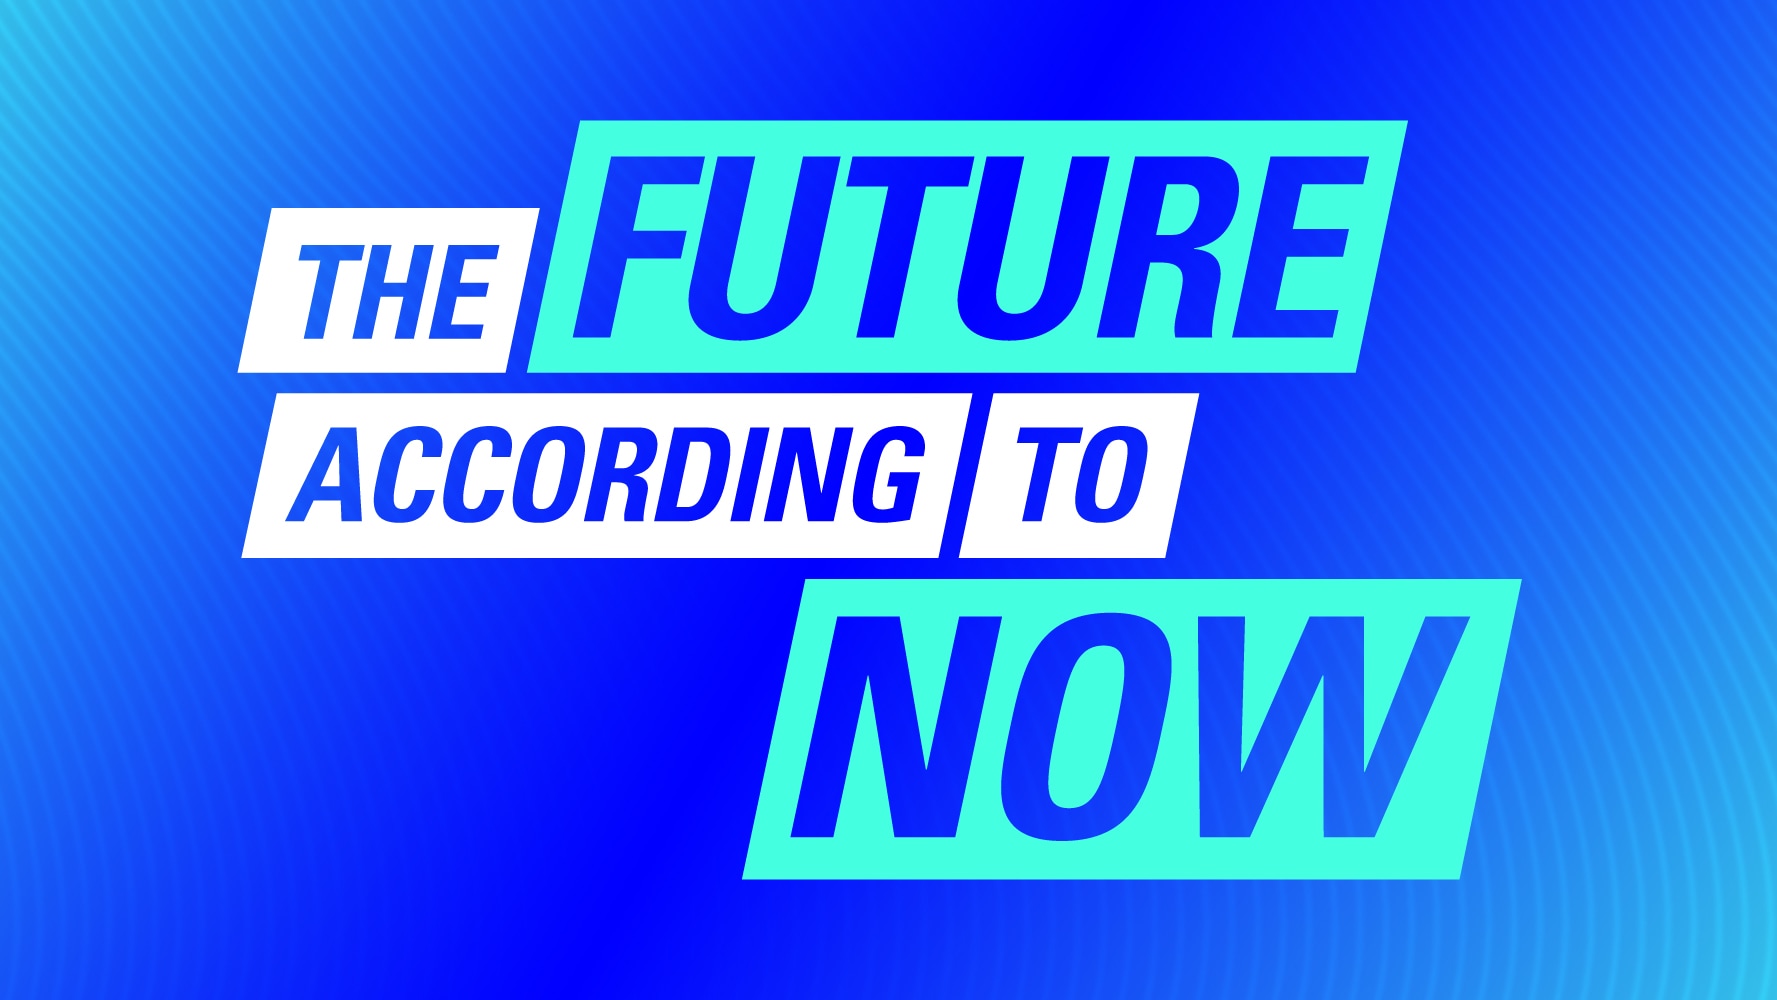 The Future According to Now